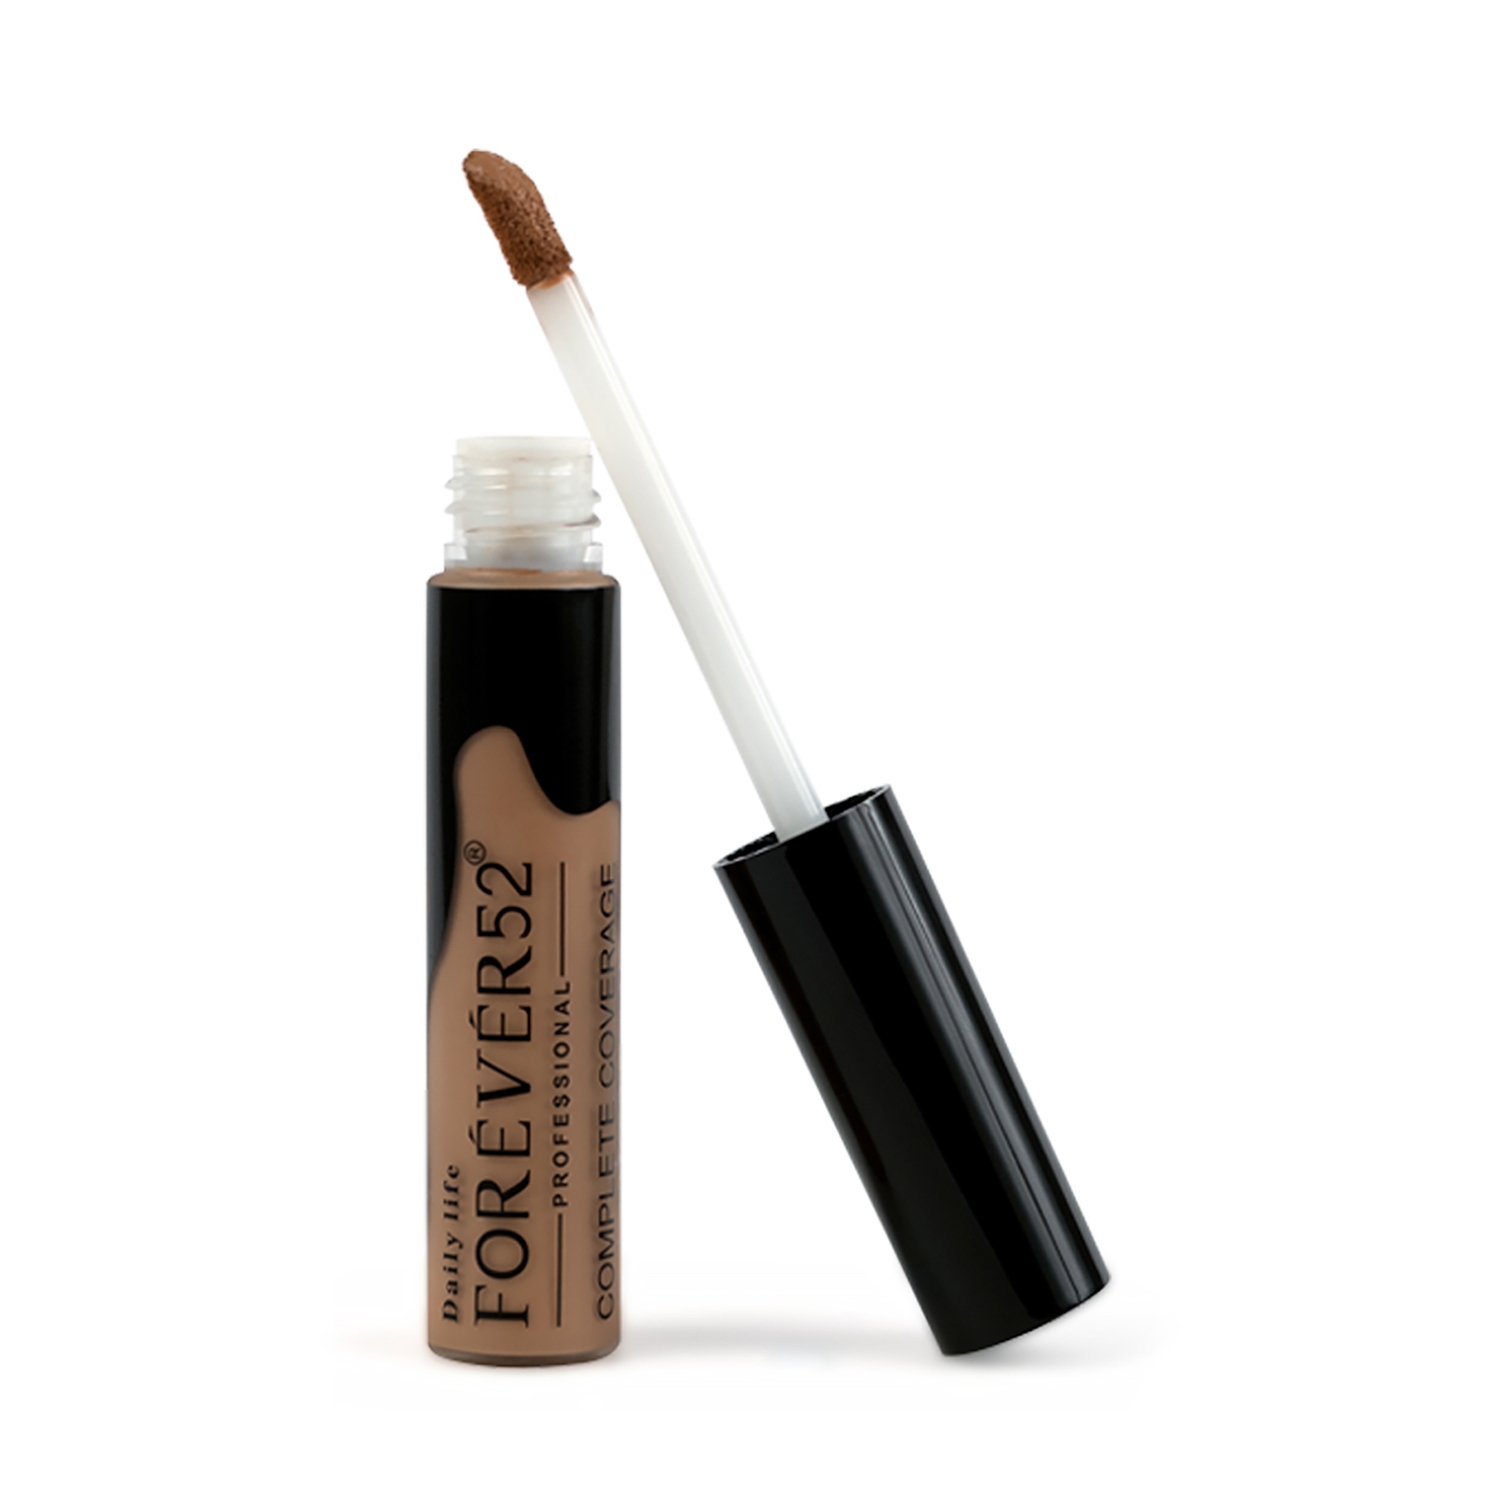 Daily Life Forever52 | Daily Life Forever52 Complete Coverage Concealer COV005 - Caramel (10g)